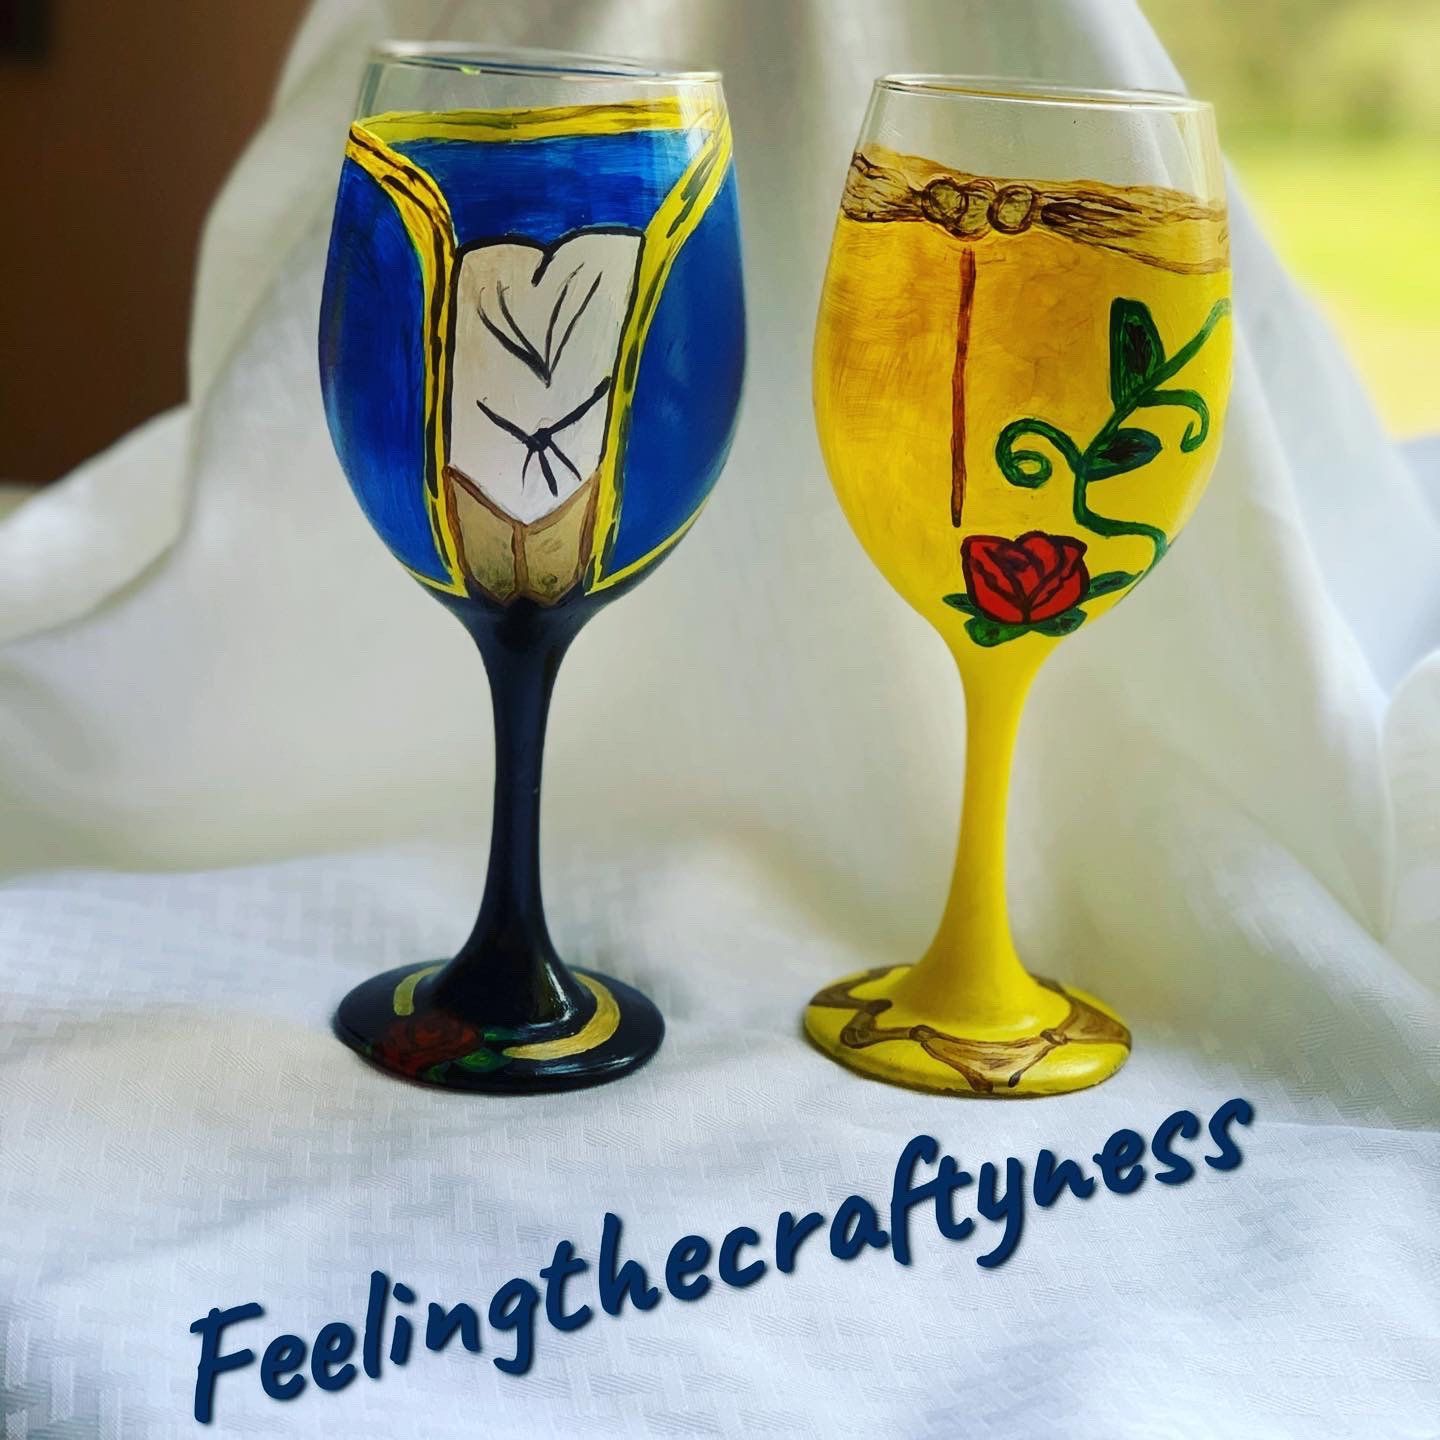 Beauty and the Beast Handpainted wineglasses// Beauty and the Beast Wedding// Beauty and the Beast Quincenera //personalized wine glass - Beauty and the Beast Handpainted wineglasses// Beauty and the Beast Wedding// Beauty and the Beast Quincenera //personalized wine glass -   14 beauty And The Beast diy ideas